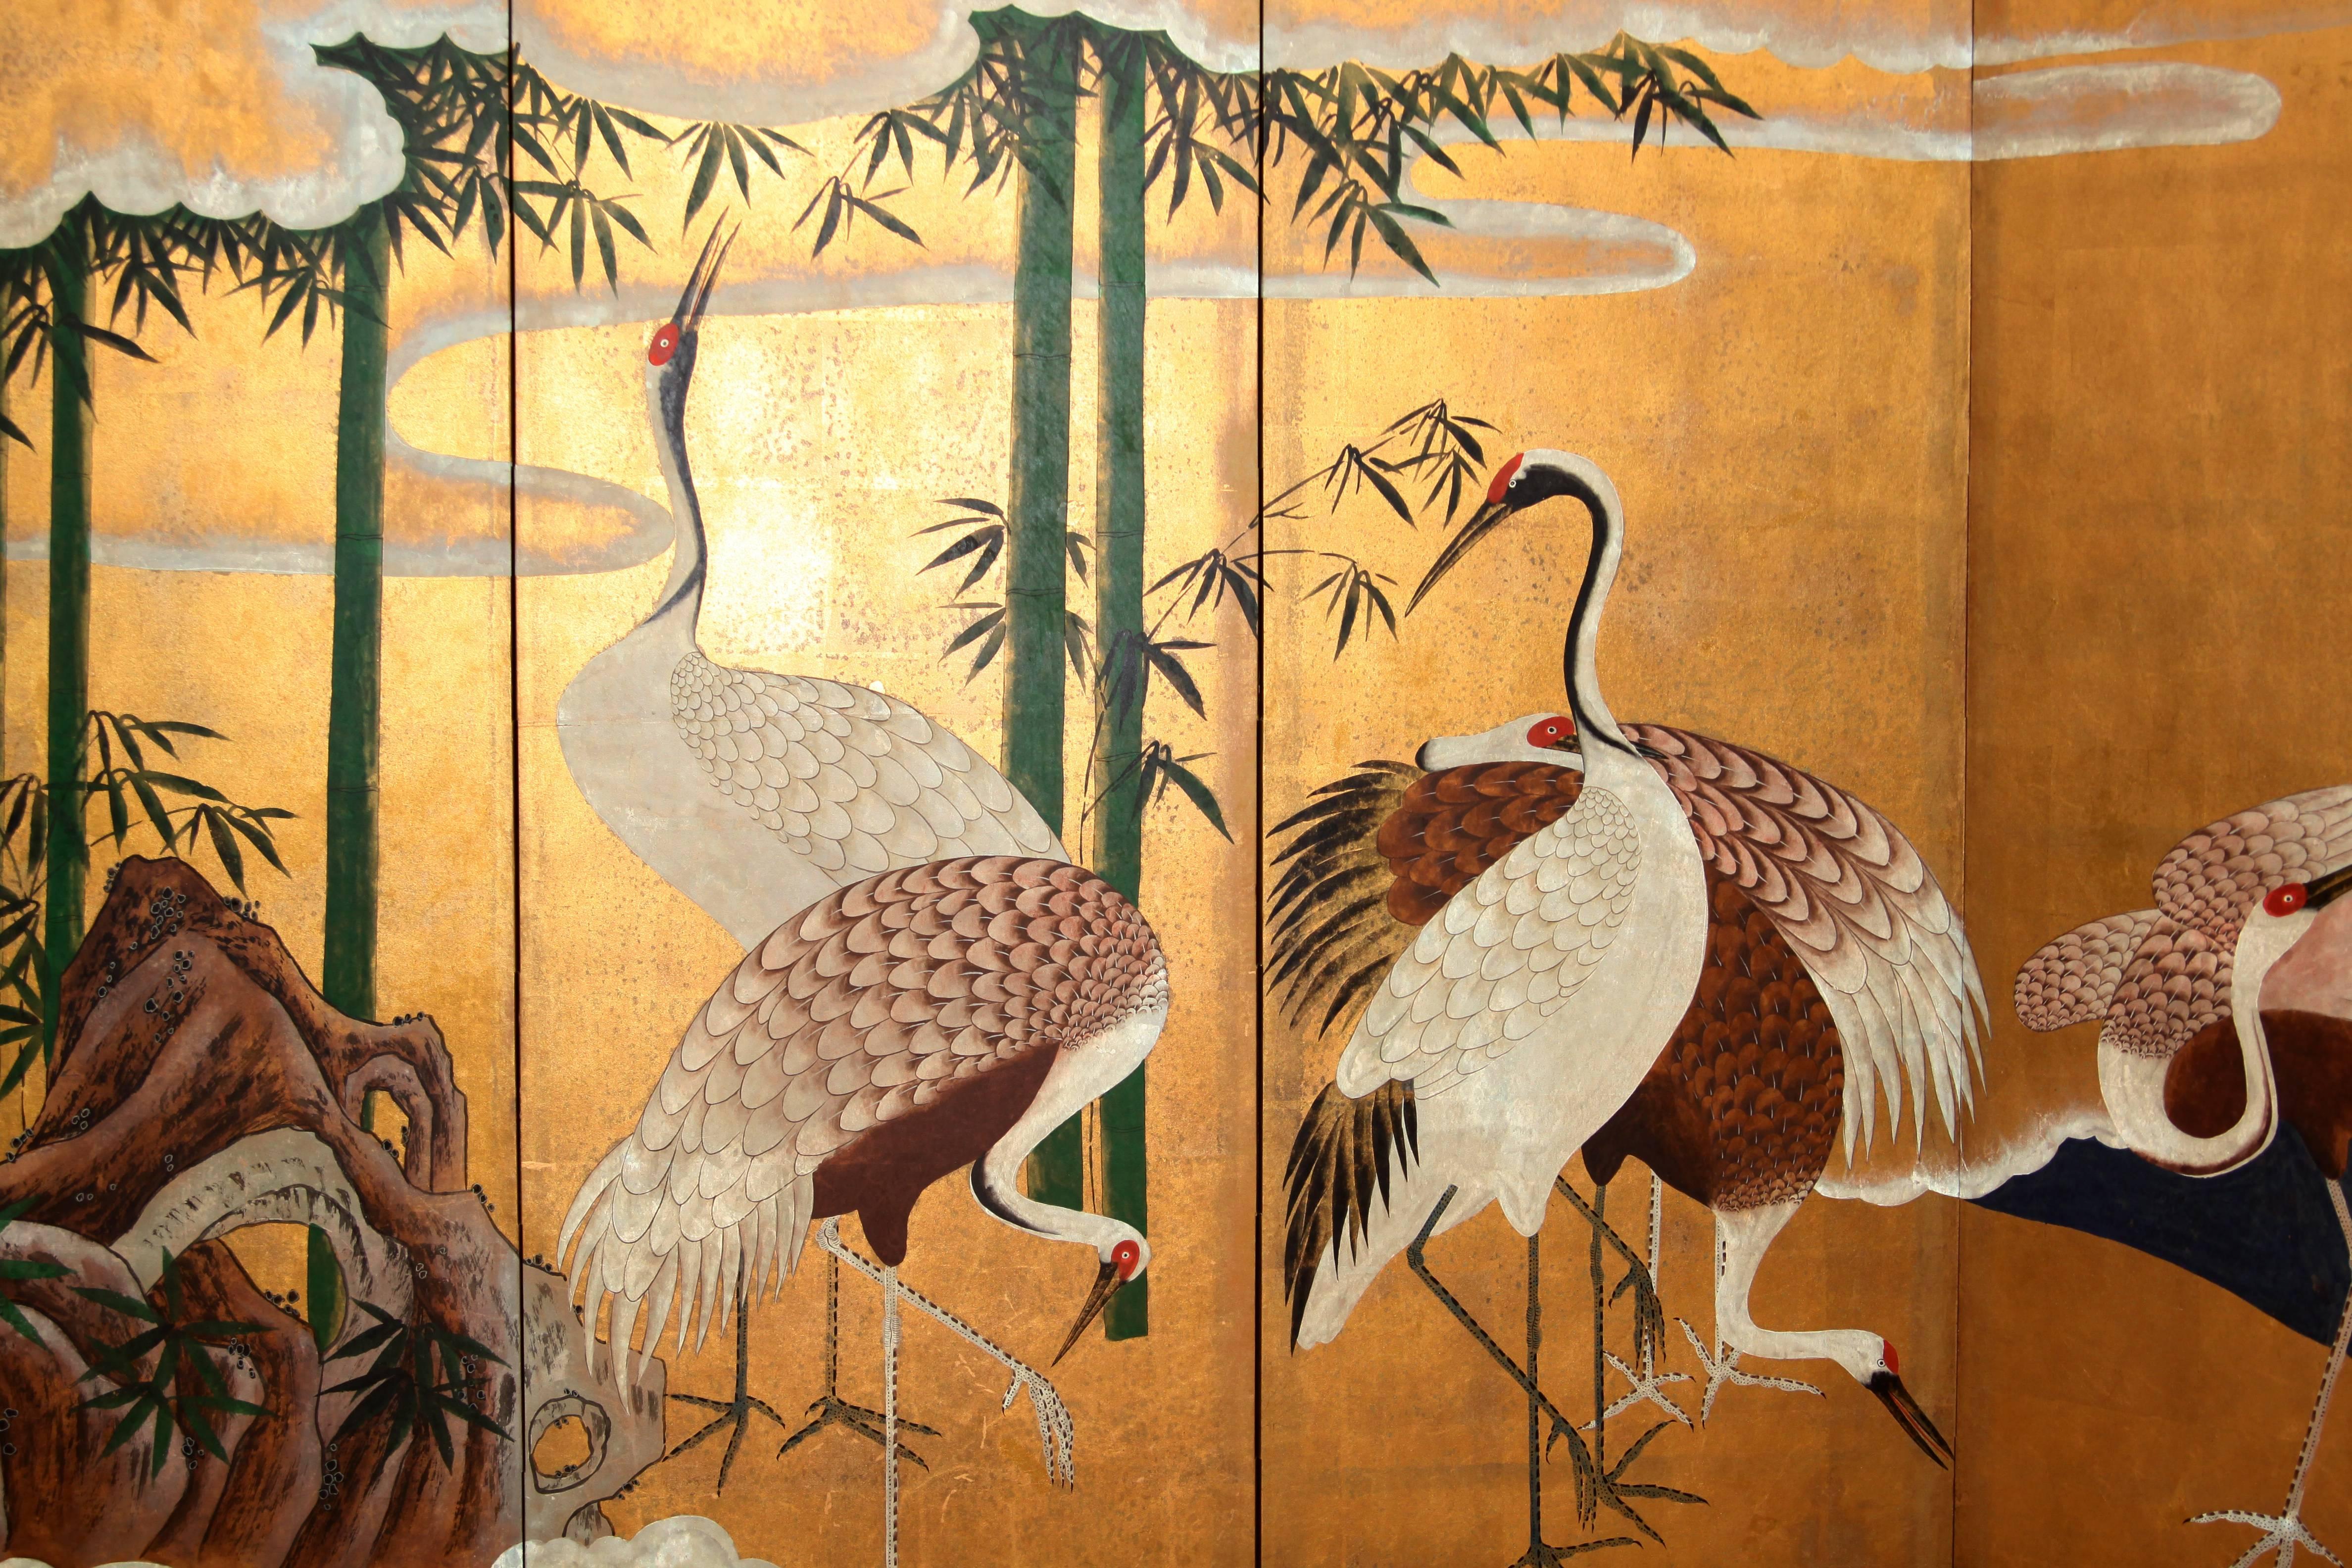 The painting of gathering of cranes of this six-panel screen is hand-painted in watercolor, on squares of gold leaf which are applied by hand to the paper base over carefully jointed wooden lattice frames. Lacquer rails are then applied to the